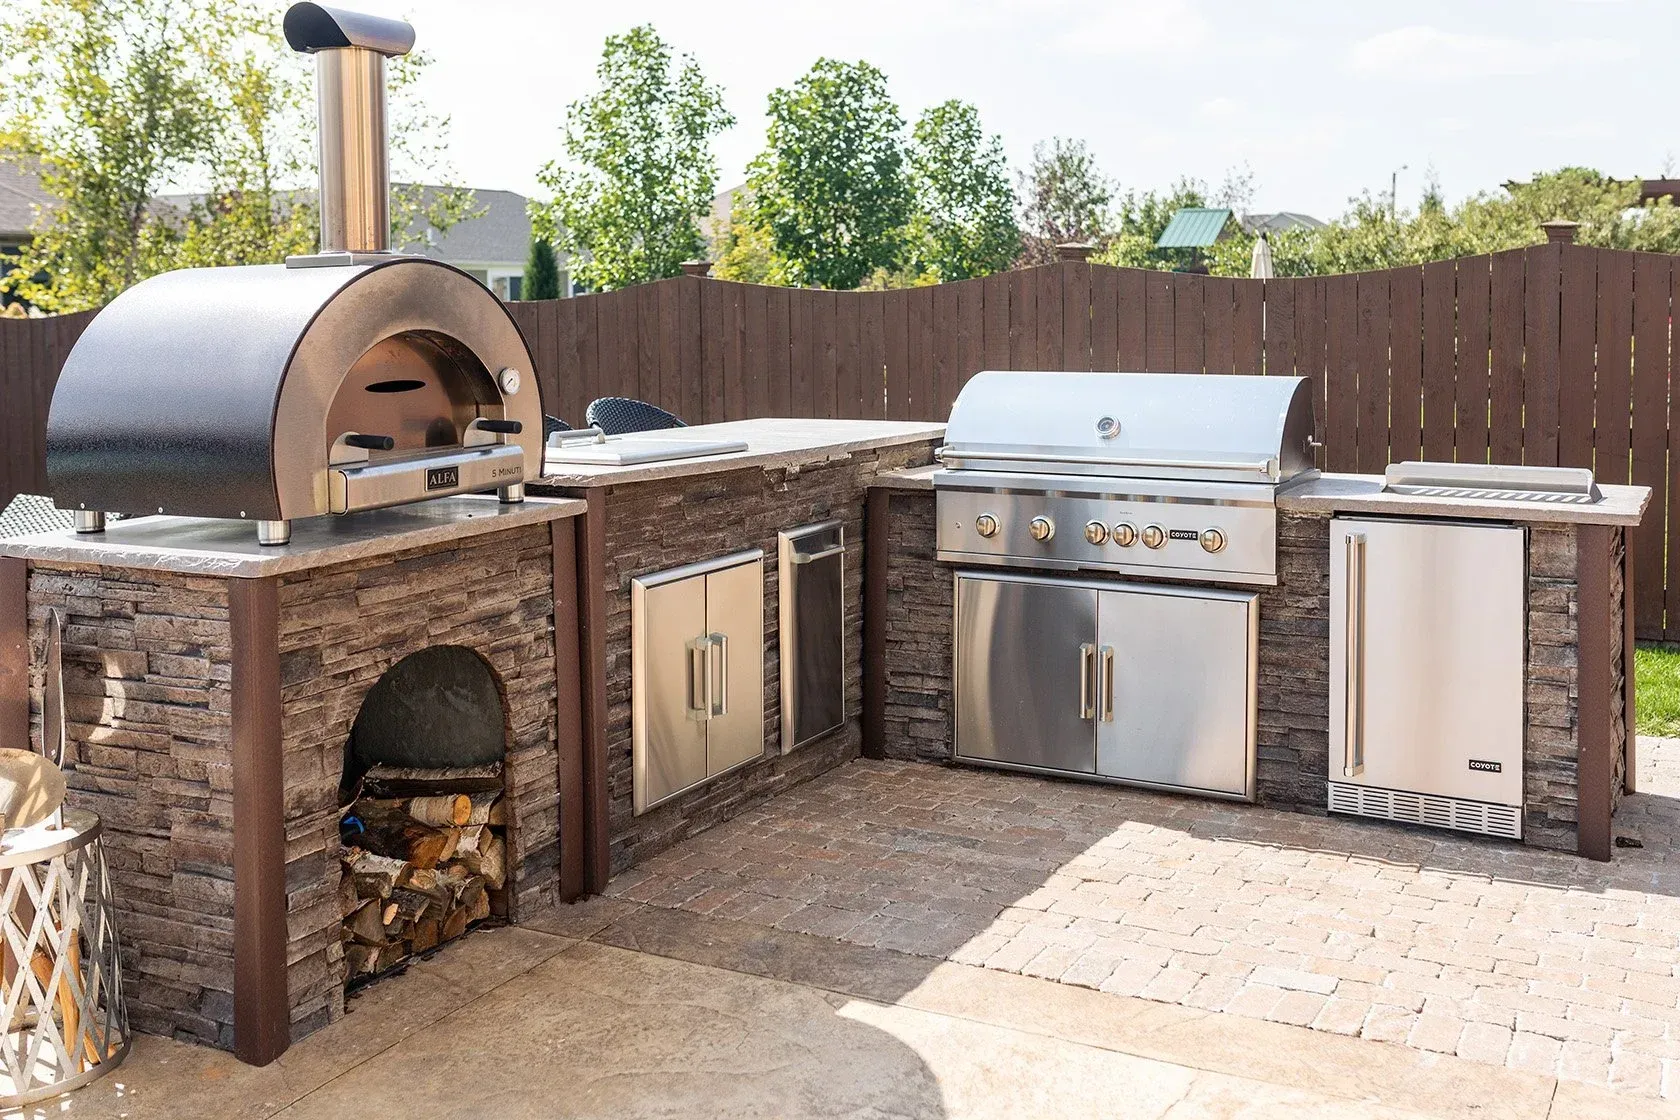 Add-on Outdoor Kitchen Features That Will Boost Property Value